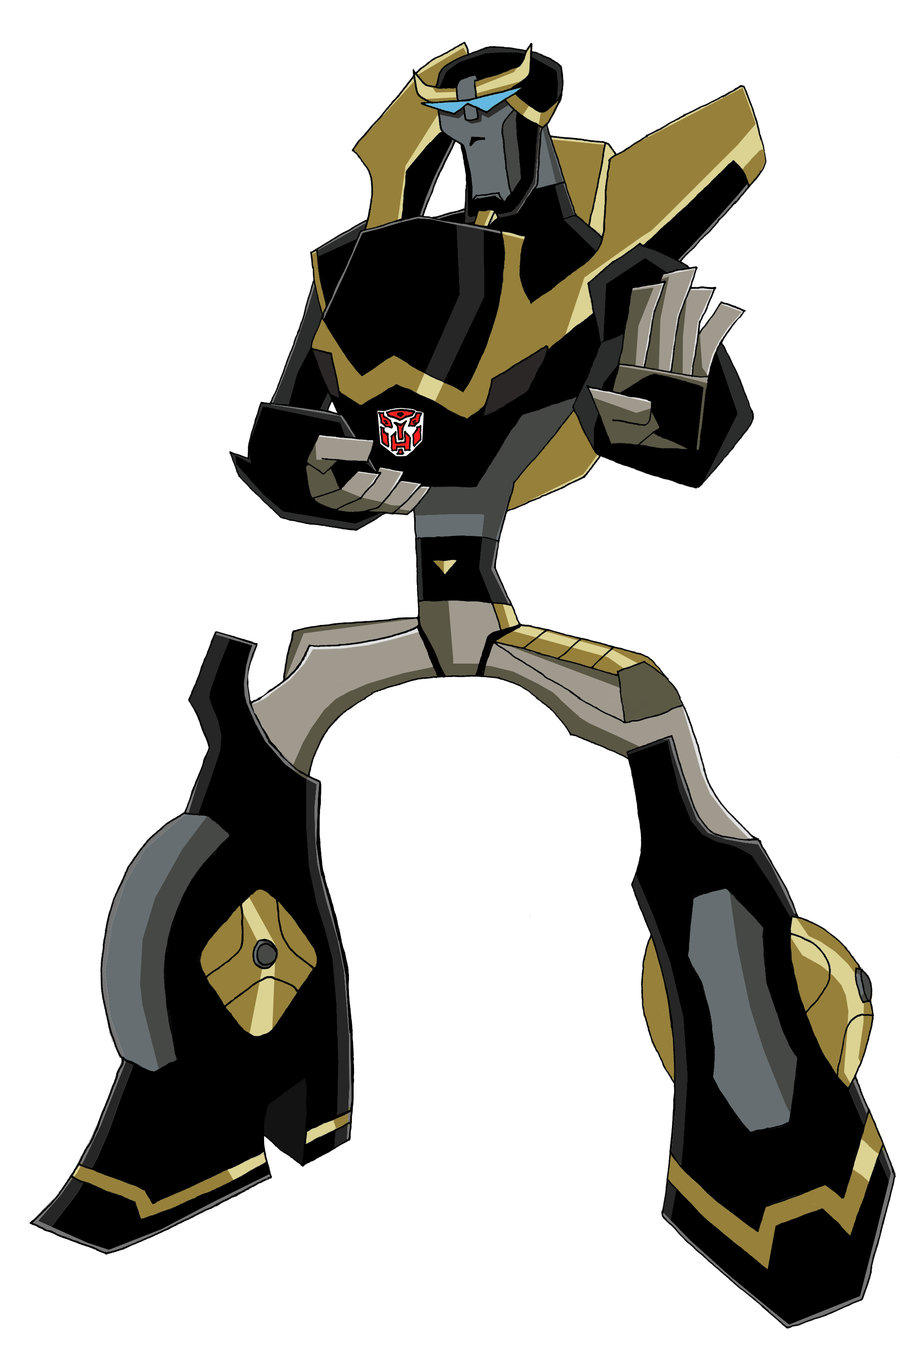 Transformers Animated Prowl by MttKn14 on DeviantArt